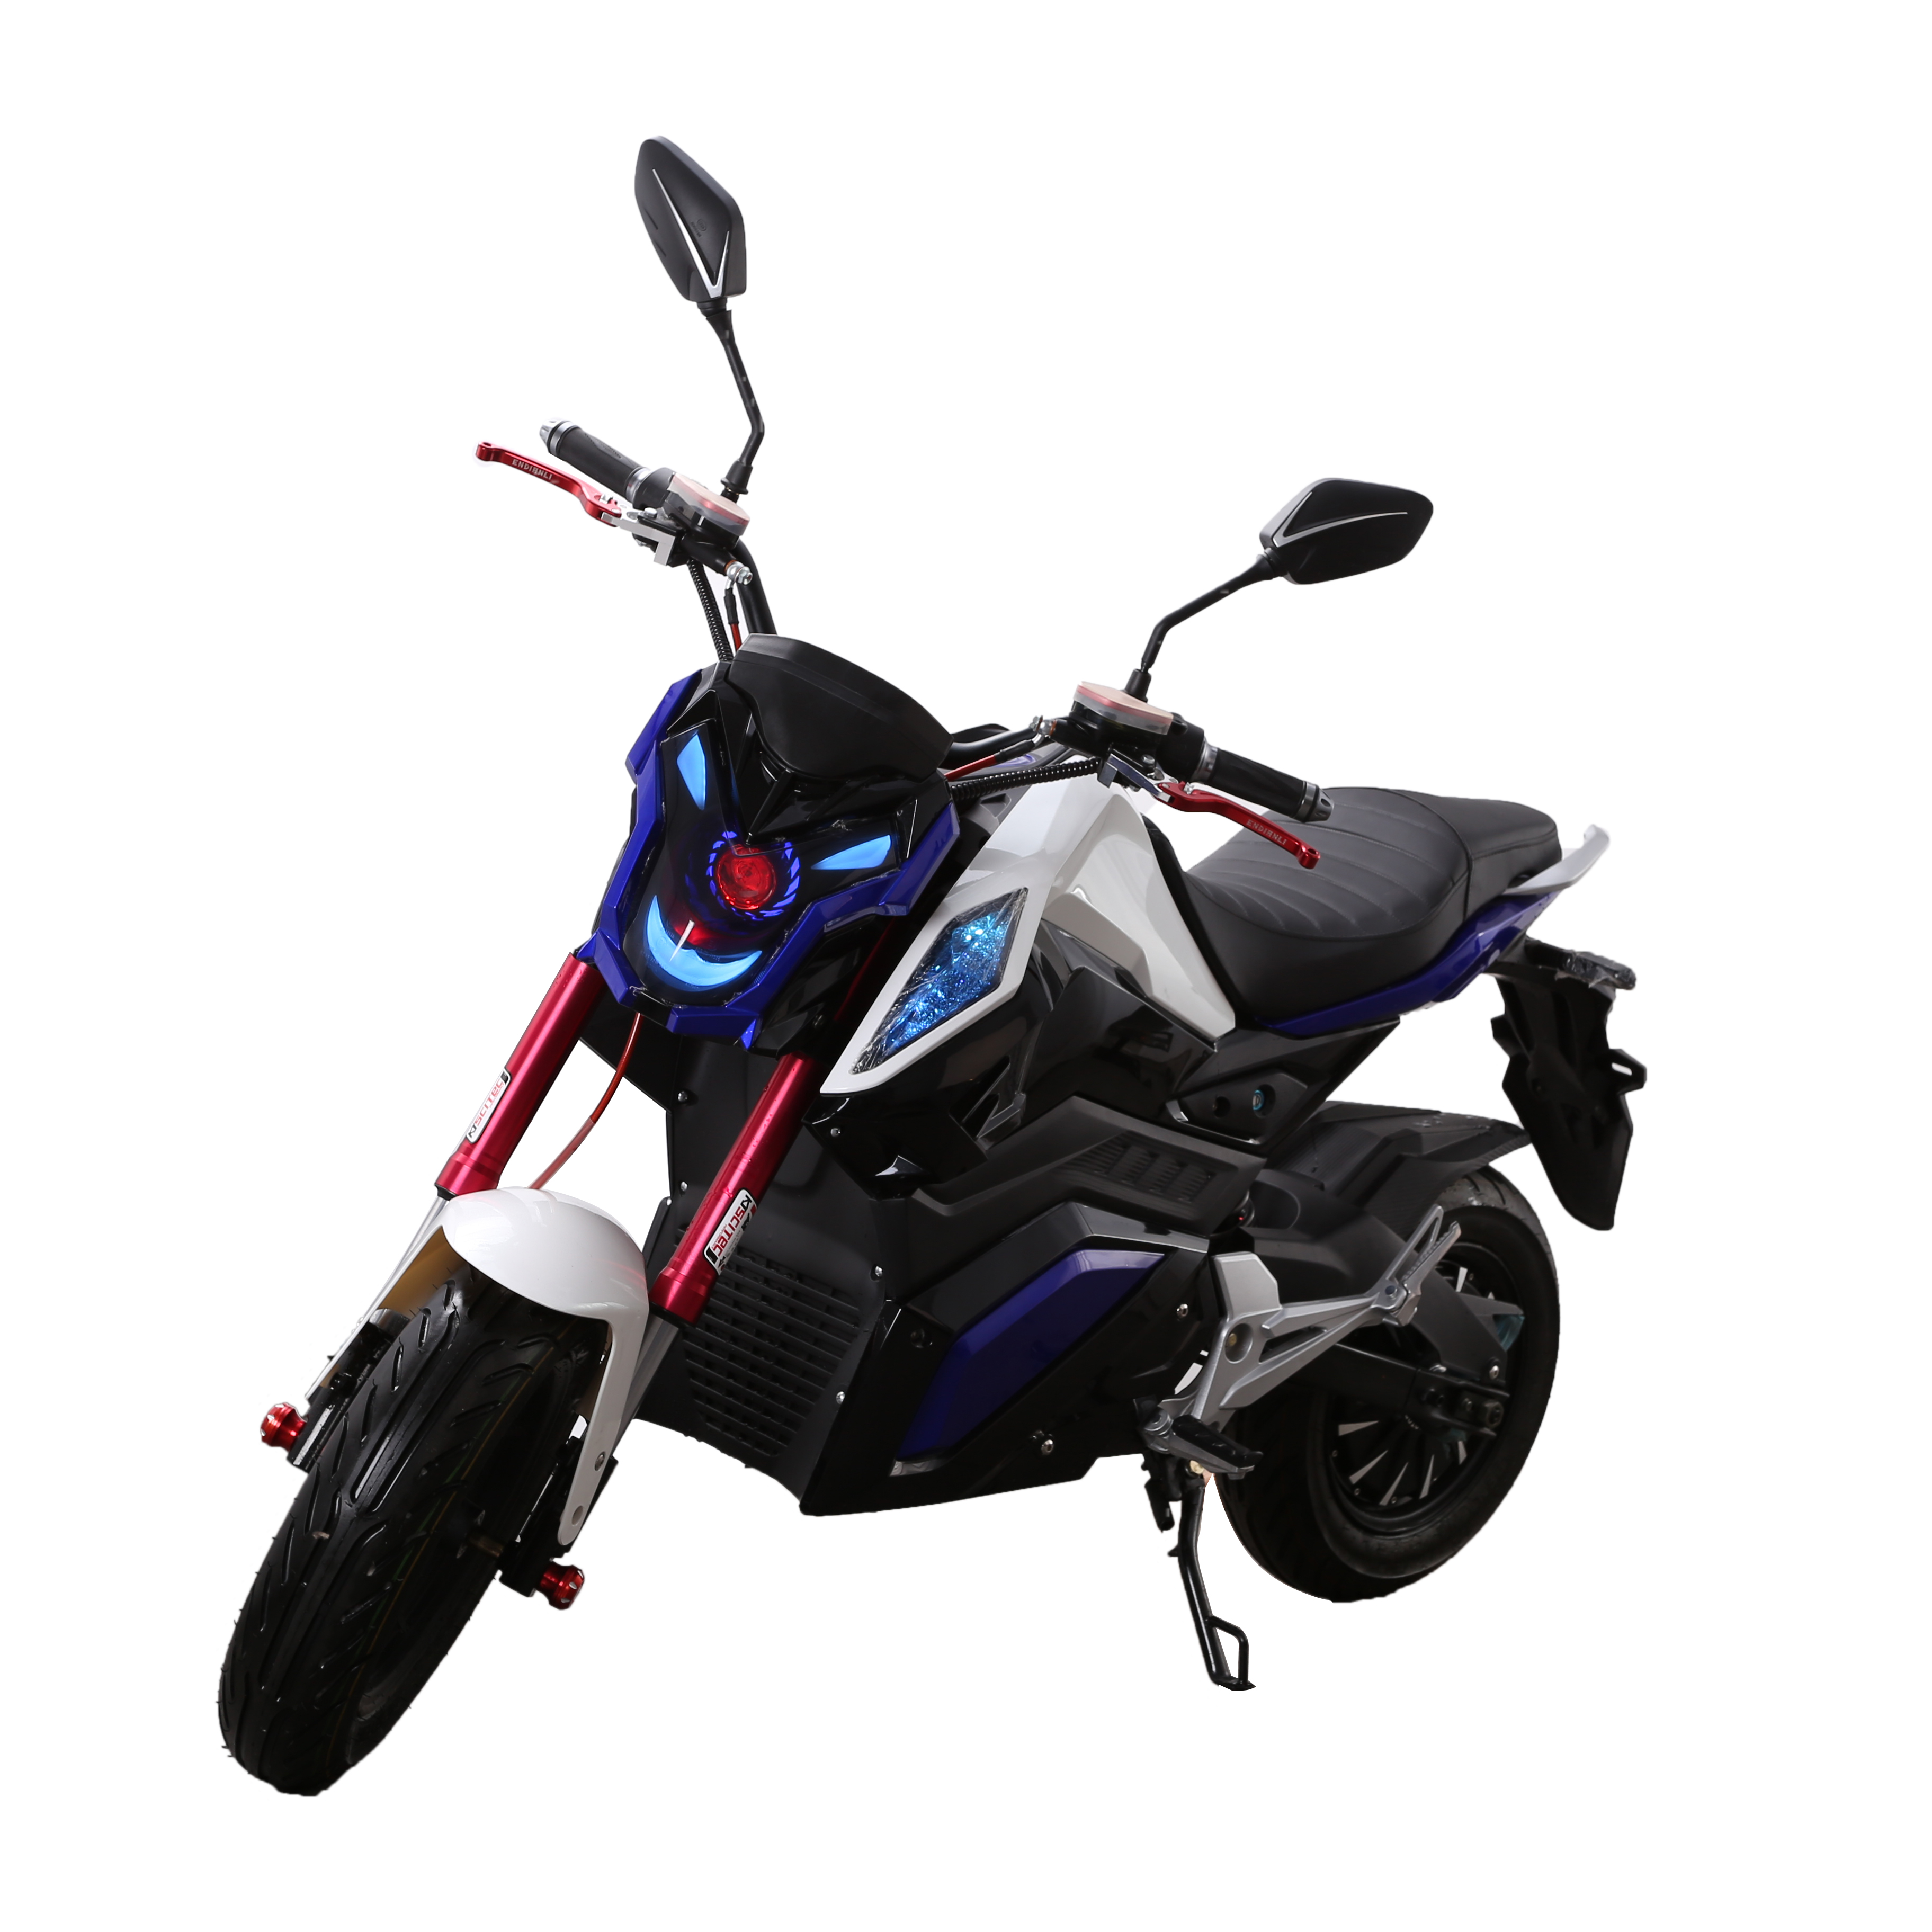 72V2000W High Performance Electric Motorcycle for Audlts